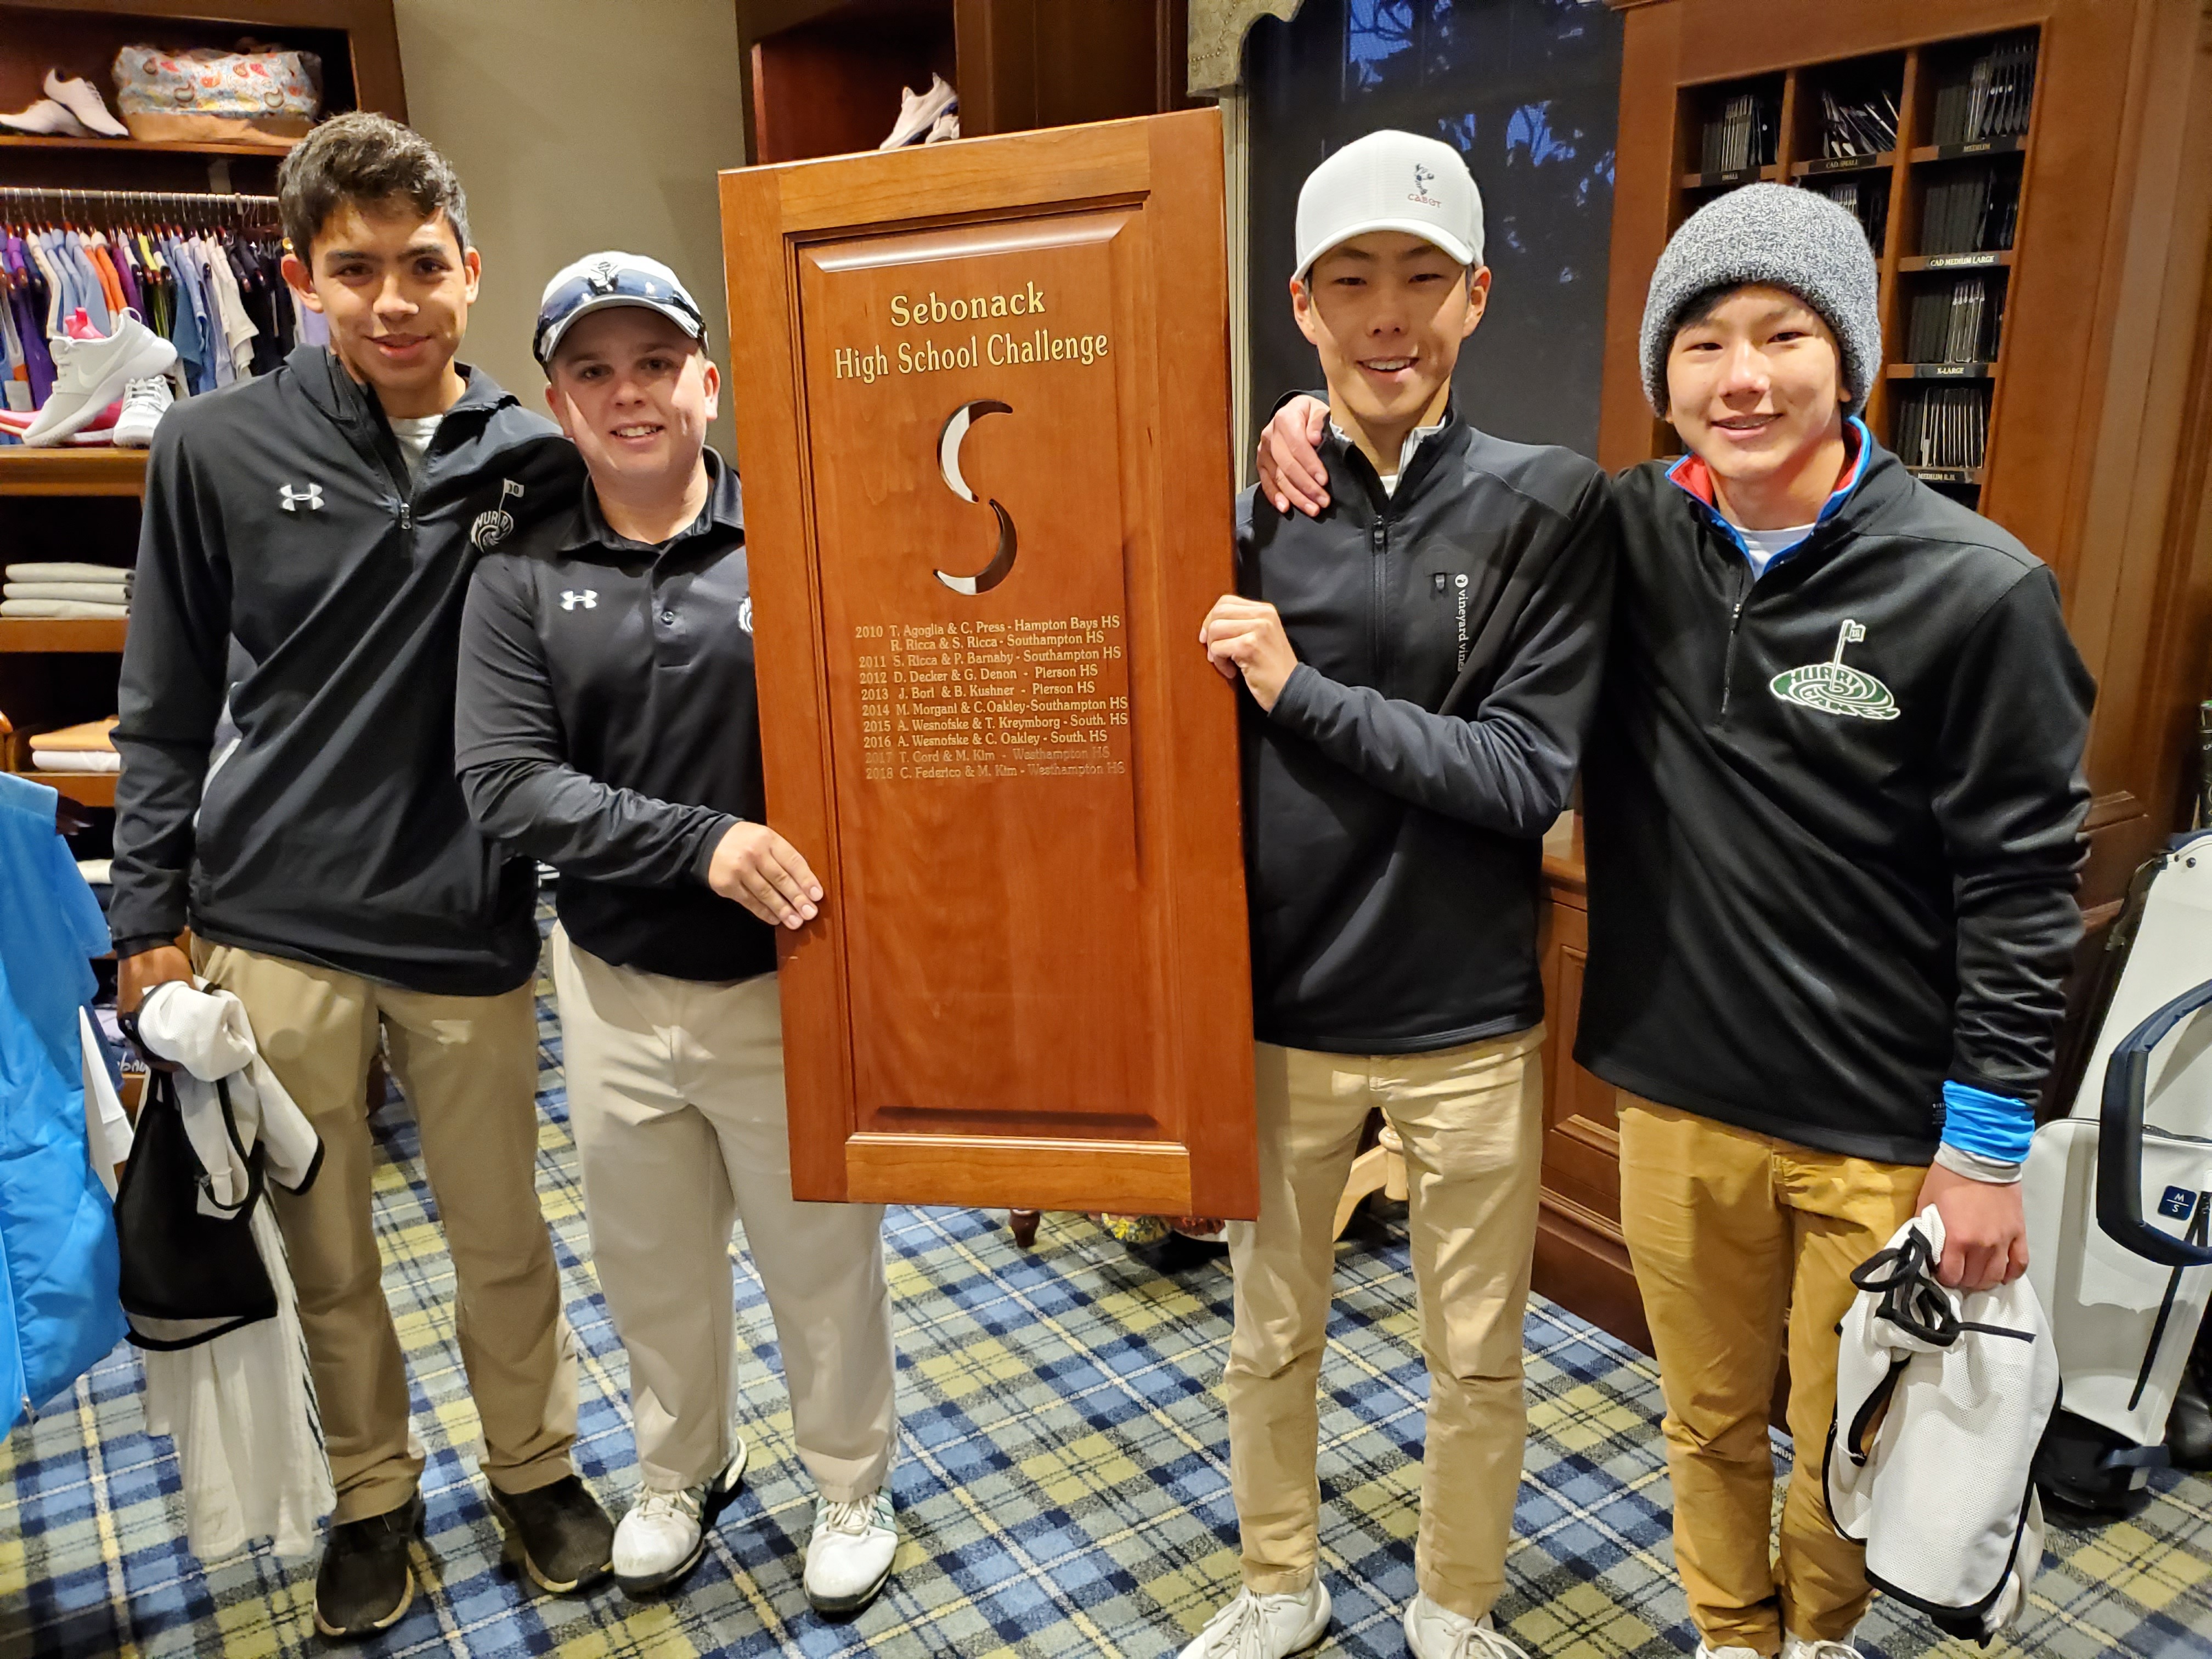 From left, Tyler Puch, Cole Federico, Mackenzie Kim and Cooper Kim are bringing back their plaque to Westhampton Beach.